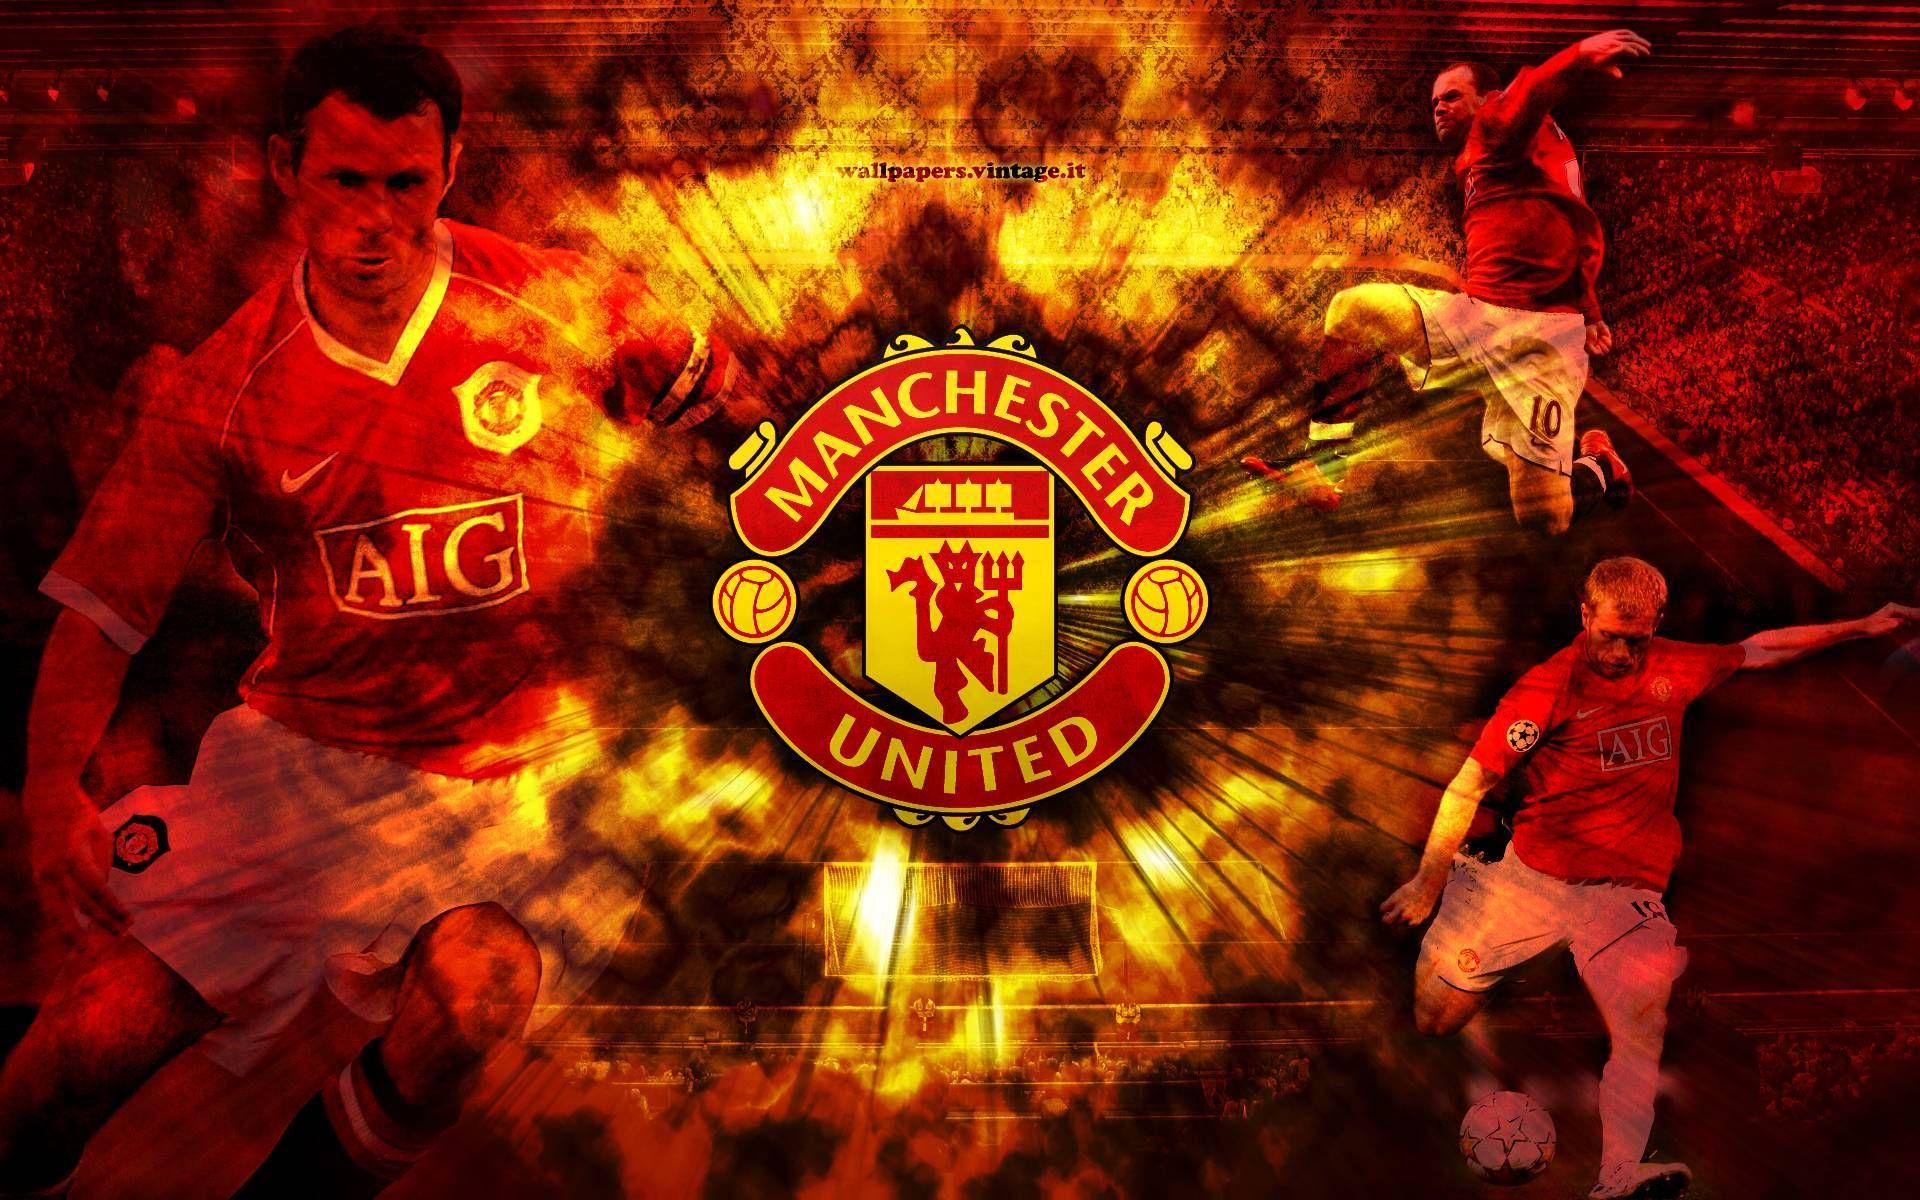 Download free manchester united wallpaper for your mobile phone